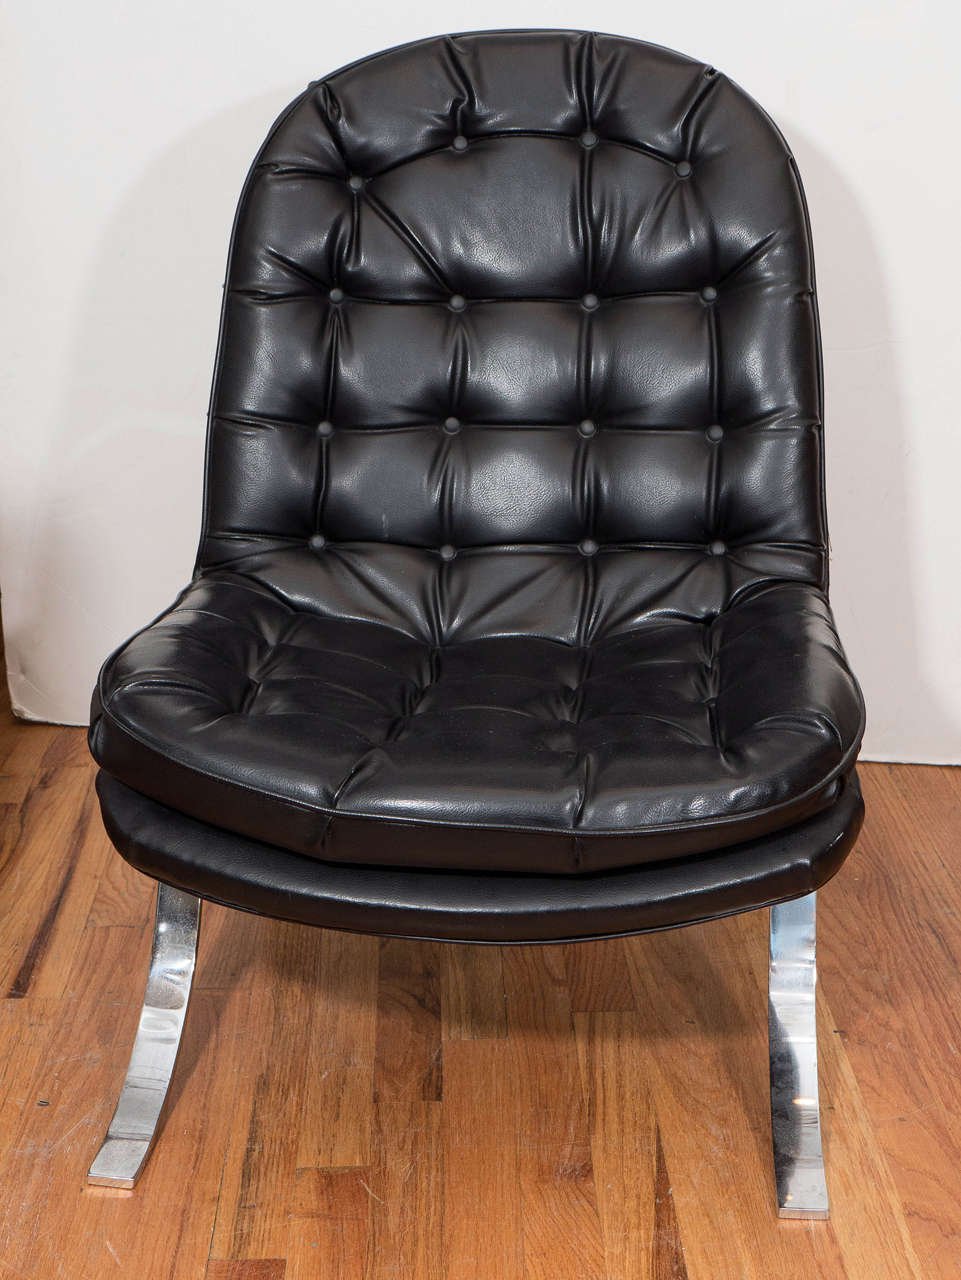 A vintage lounge chair, in the style of Swedish designer Arne Norell's 'Ari' chairs, produced circa 1960s-1970s, upholstered in tufted black vinyl on flat, chrome Klismos form legs. Good vintage condition, with age appropriate wear and minor patina